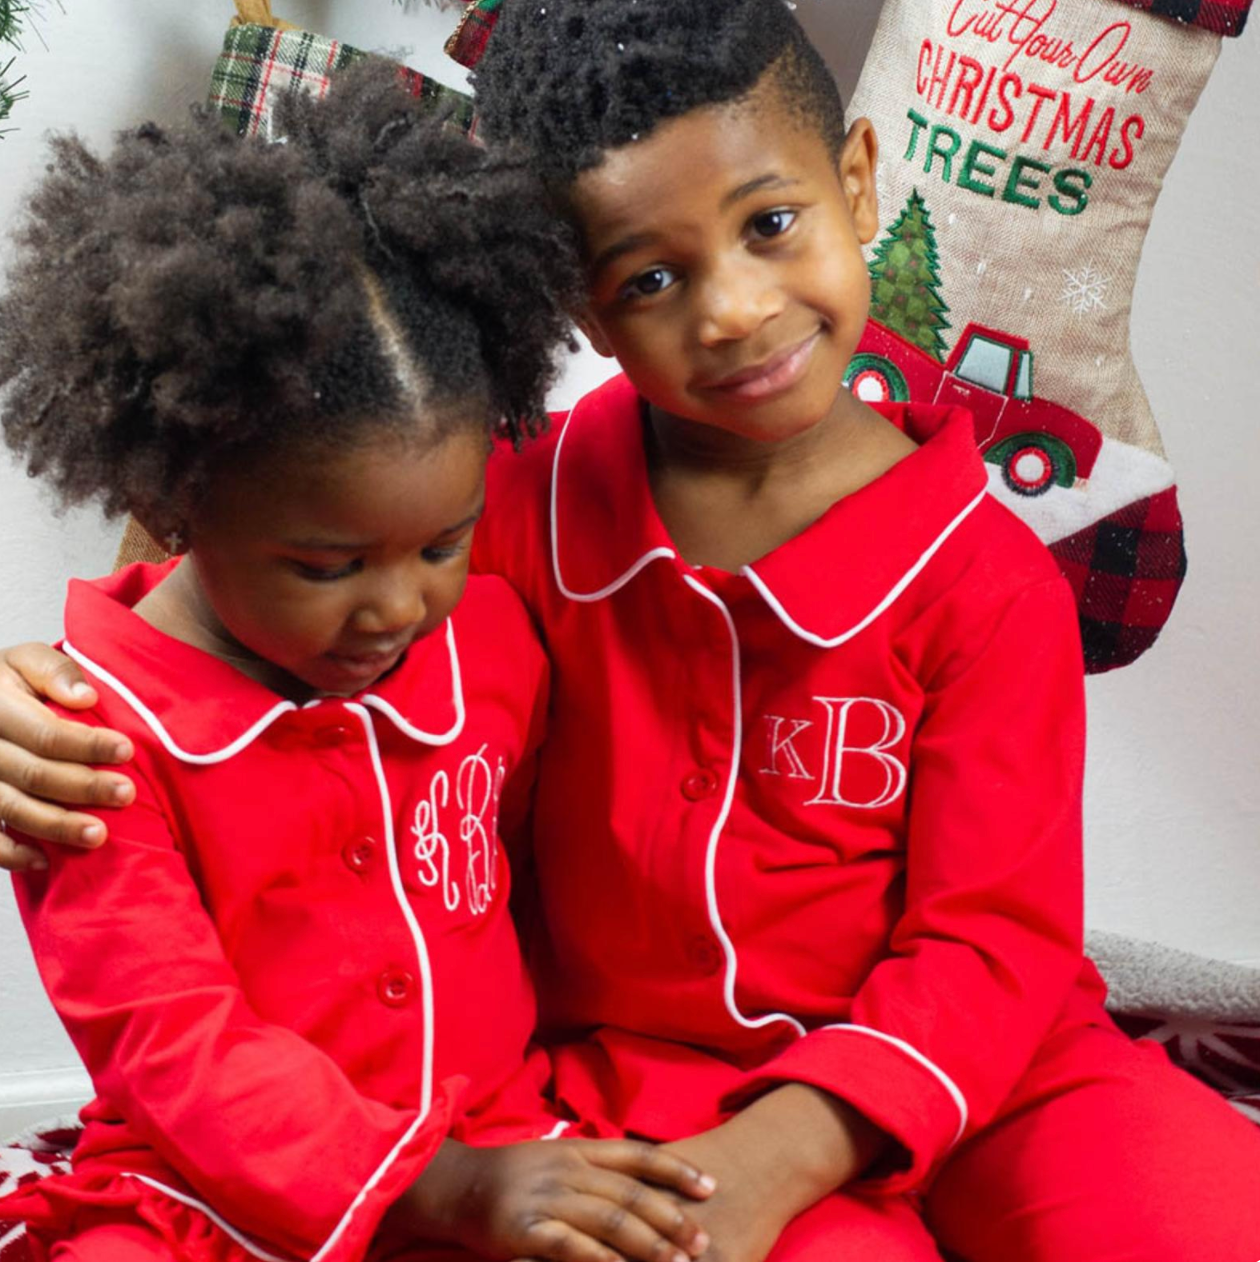 Shop These 10 Matching Family Pajamas Perfect For A Quarantined Christmas